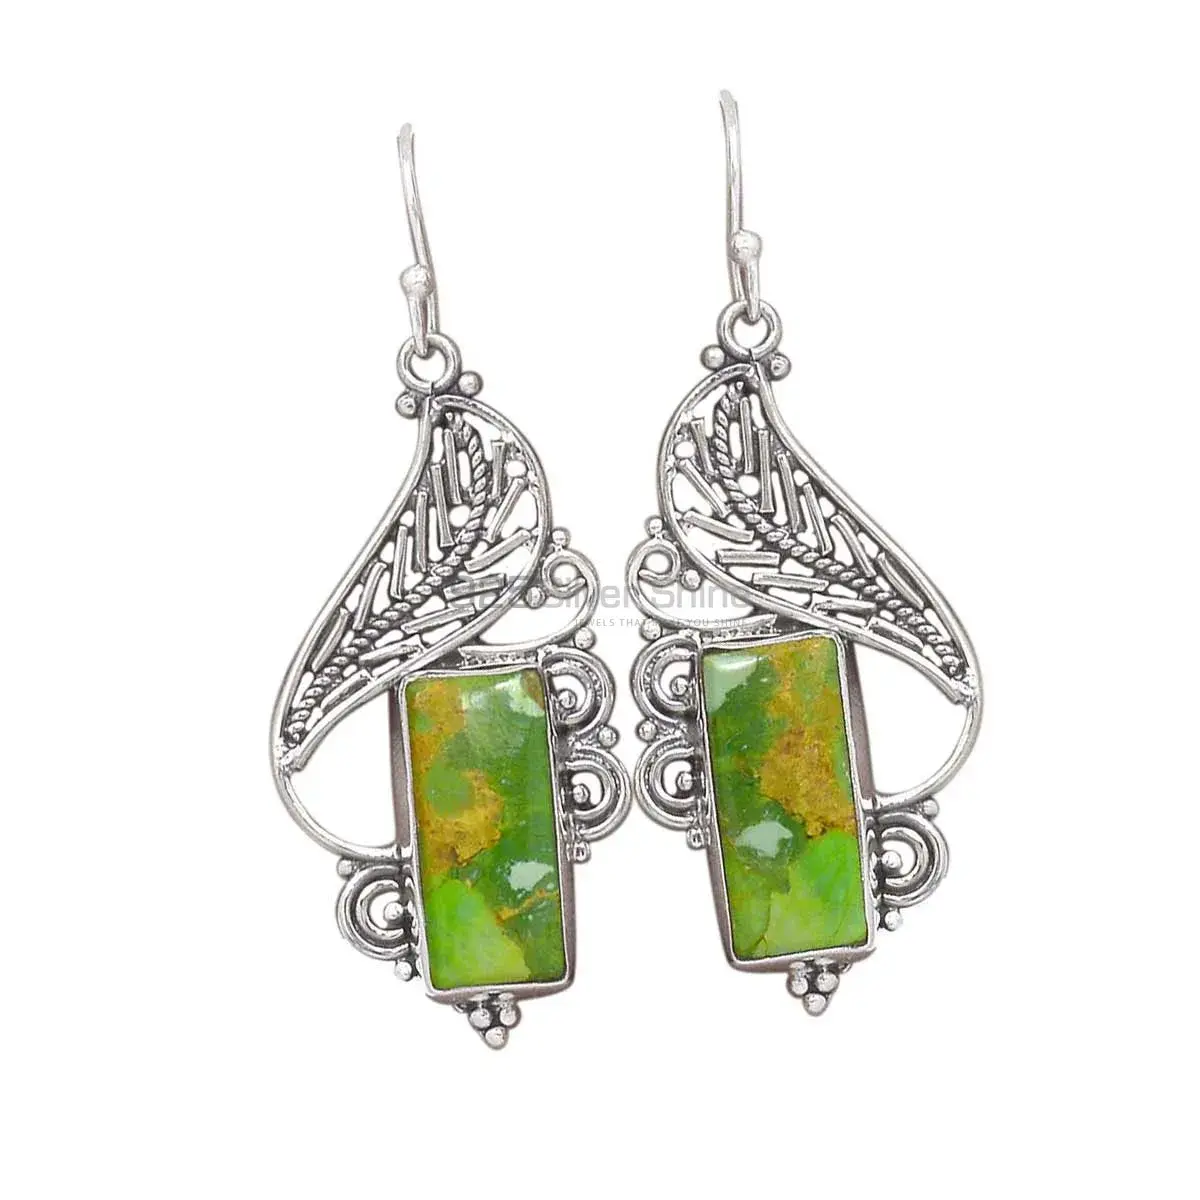 Affordable 925 Sterling Silver Handmade Earrings In Green Copper Turquoise Gemstone Jewelry 925SE2947